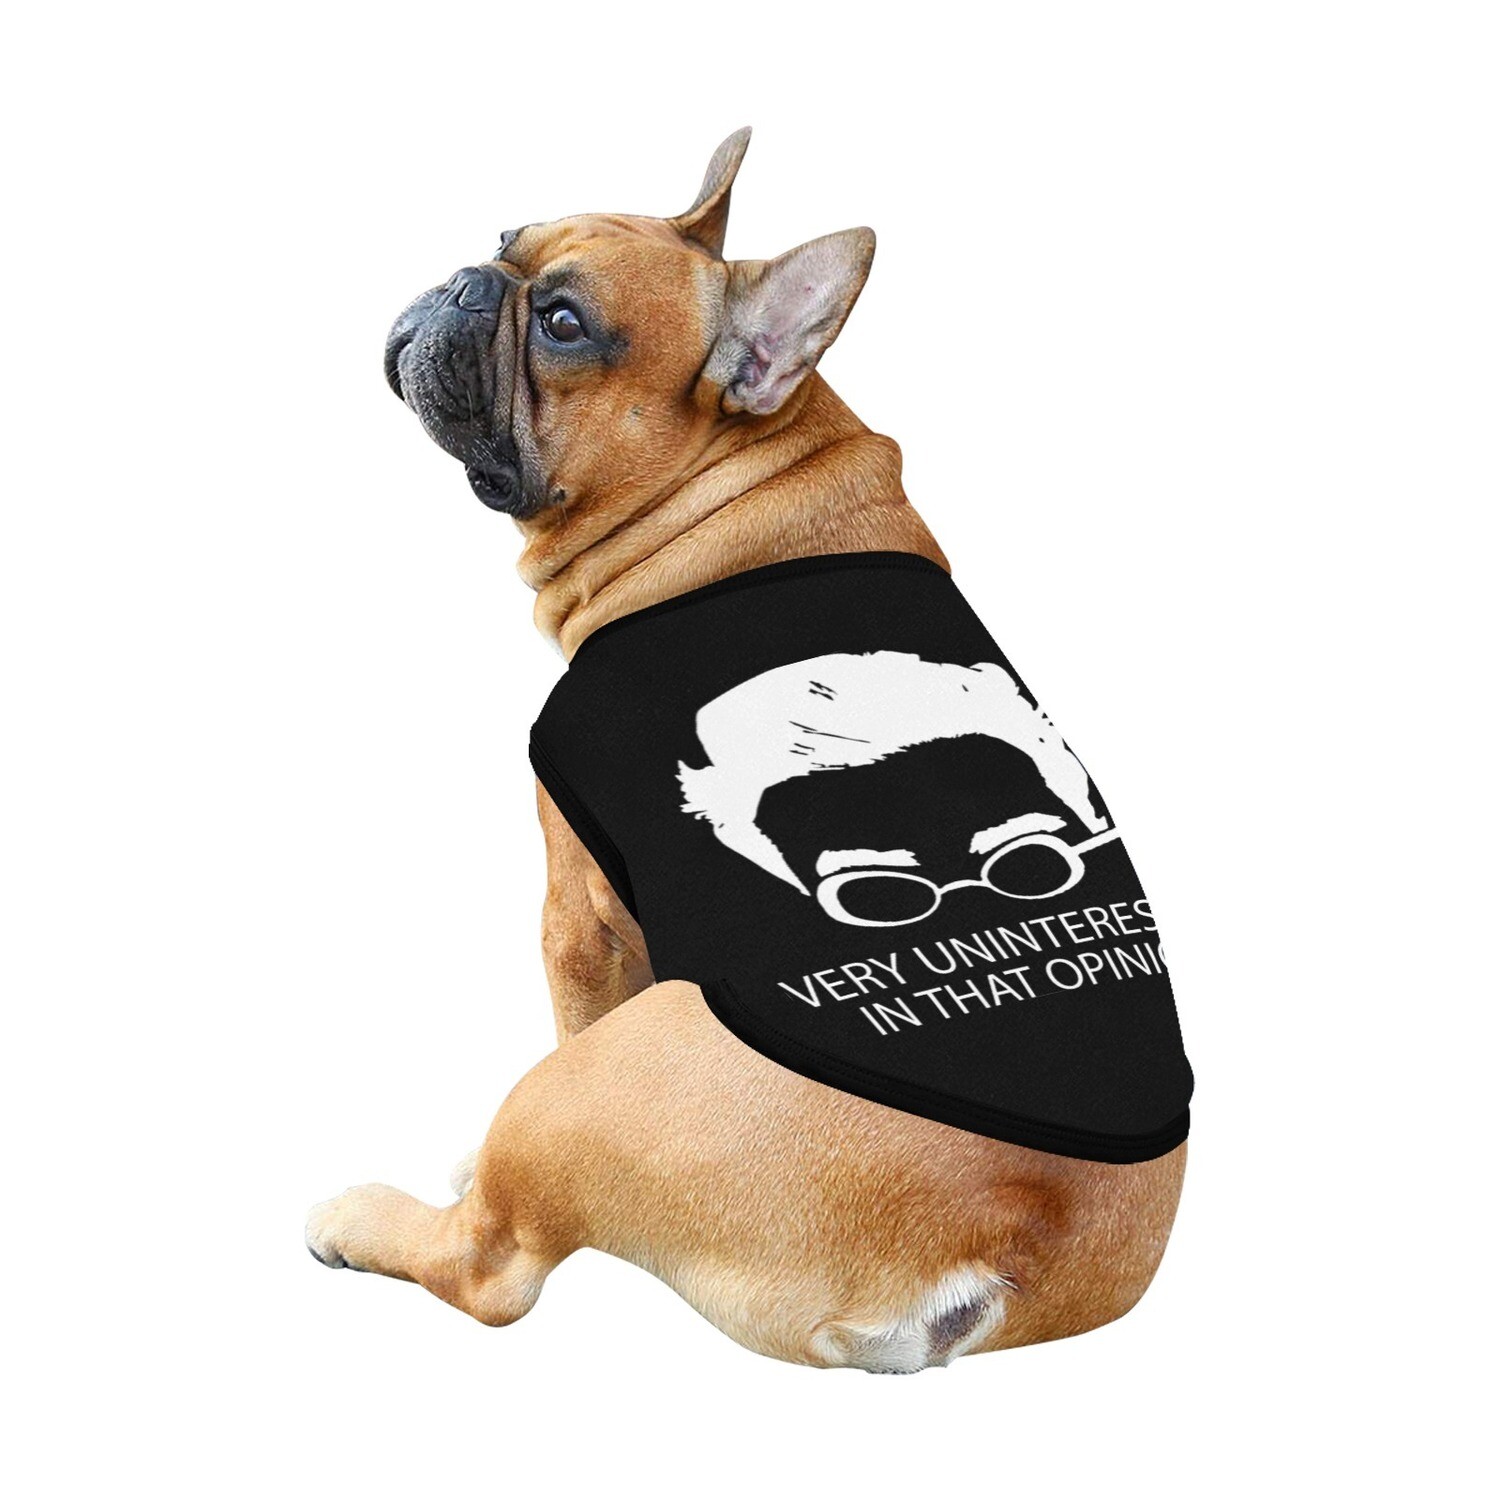 🐕 David Rose very uninterested in that opinion Dog t-shirt, Dog Tank Top, Dog shirt, Dog clothes, Gifts, front back print, 7 sizes XS to 3XL, Schitt's Creek, TV series